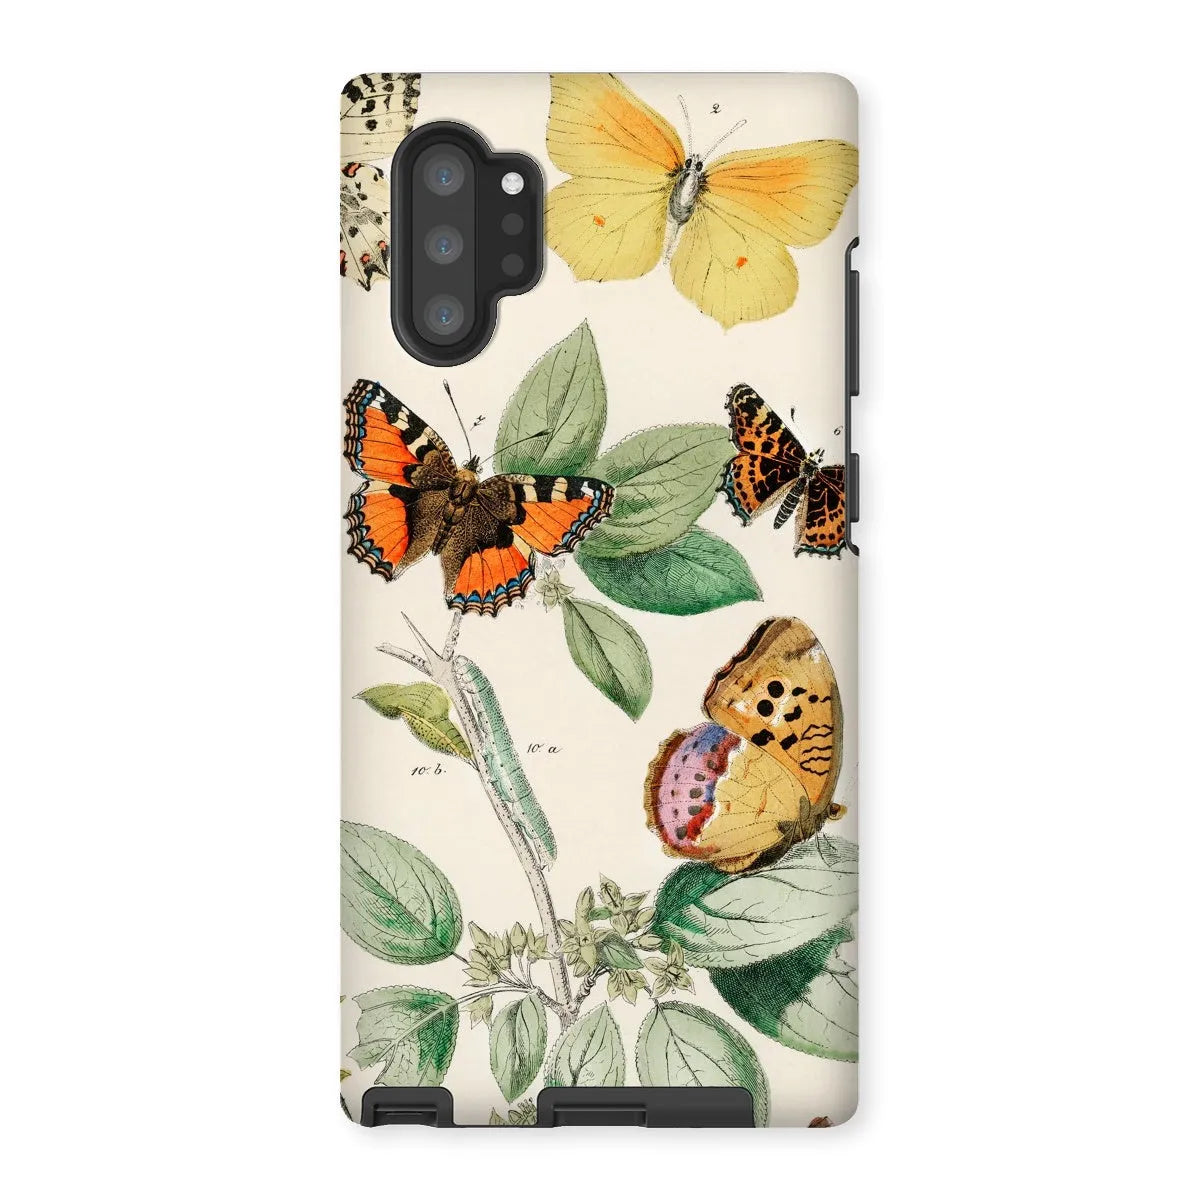 Butterfly Aesthetic Art Phone Case - William Forsell Kirby - Samsung Galaxy Note 10p / Matte - Mobile Phone Cases